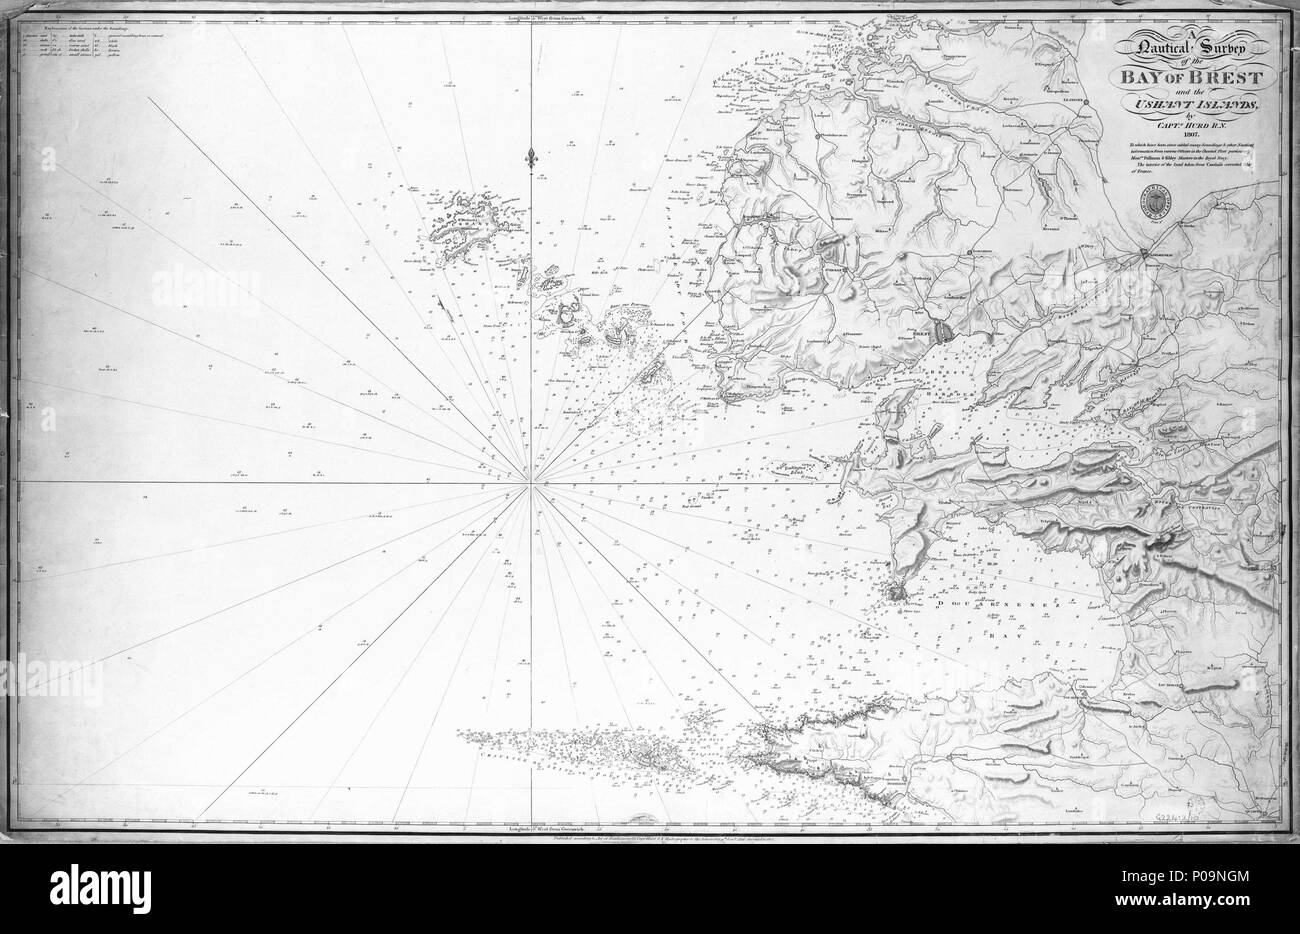 .  English: A nautical survey of the Bay of Brest and the Ushant Islands by Captn Hurd RN 1807. The interior of the land taken from Cassini's corrected Map of FranceScale: circa 1:125,000. Linen backed chart A nautical survey of the Bay of Brest and the Ushant Islands by Captn Hurd RN 1807. The interior of the land taken from Cassini's corrected Map of France  . 1823; 1816. British Admiralty; Captn Hurd RN 138 A nautical survey of the Bay of Brest and the Ushant Islands by Captn Hurd RN 1807. The interior of the land taken from Cassini's corrected Map of France RMG B8780 Stock Photo